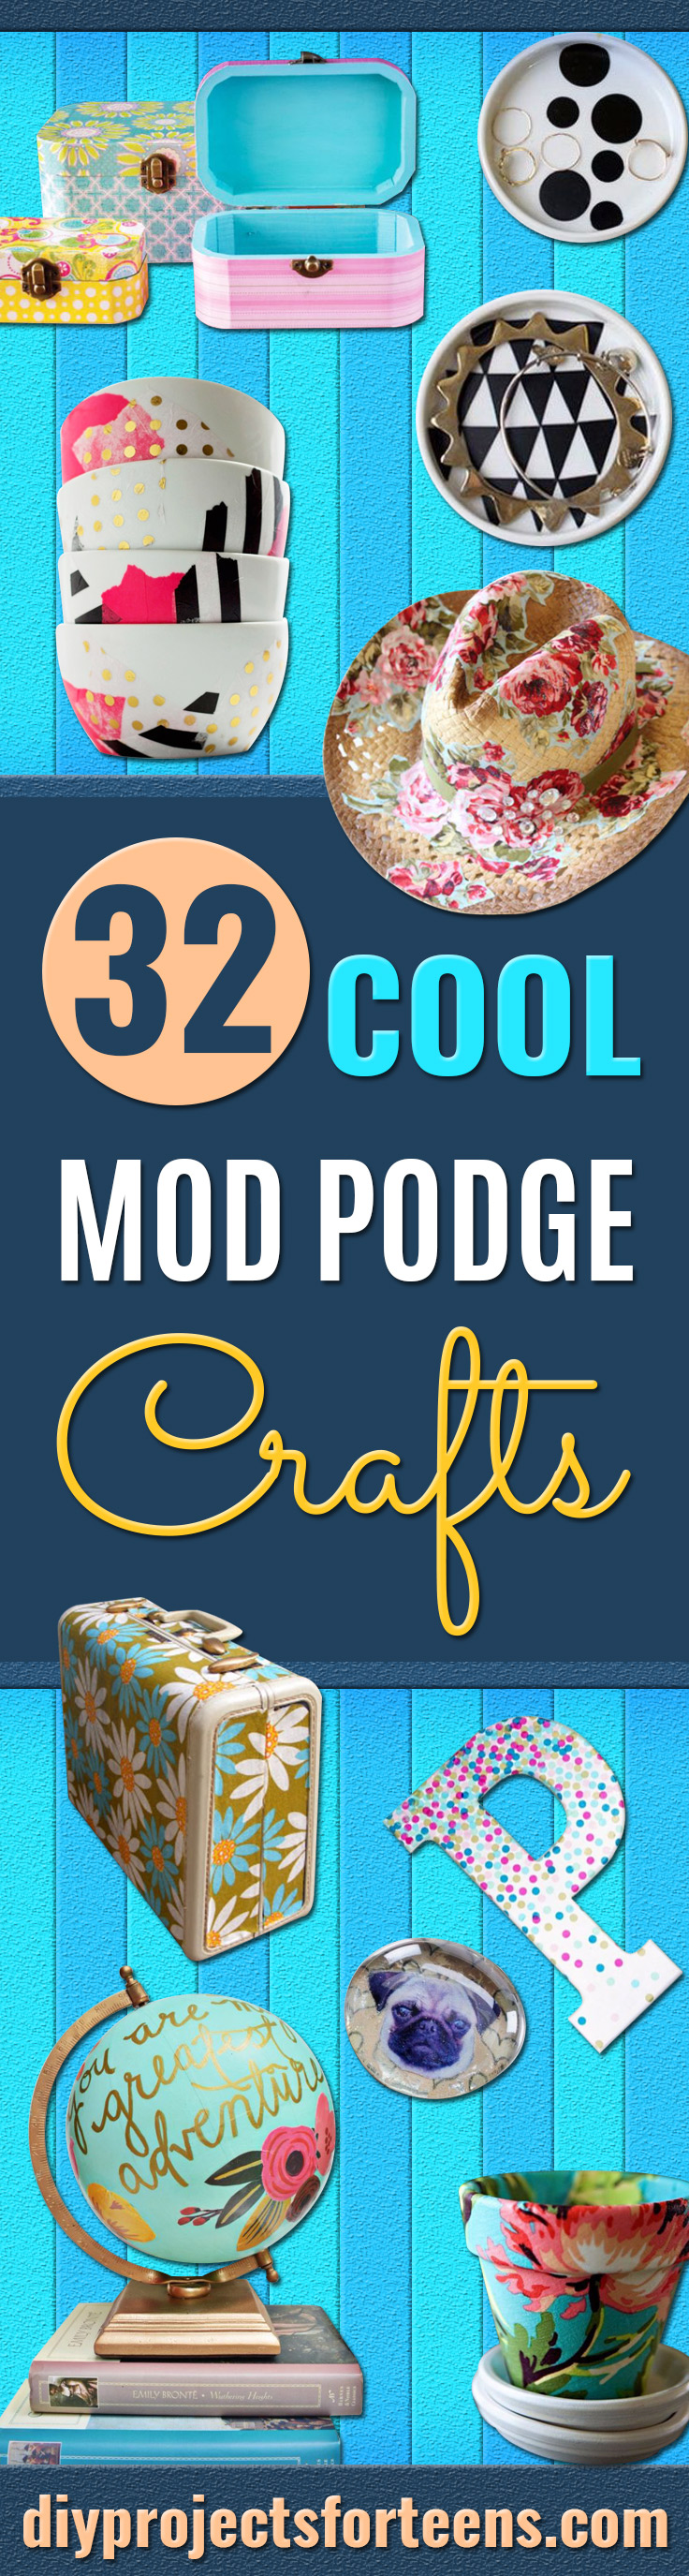 Mod Podge Crafts - DIY Modge Podge Ideas On Wood, Glass, Canvases, Fabric, Paper and Mason Jars - How To Make Pictures, Home Decor, Easy Craft Ideas and DIY Wall Art for Beginners - Cute, Cheap Crafty Homemade Gifts for Christmas and Birthday Presents 